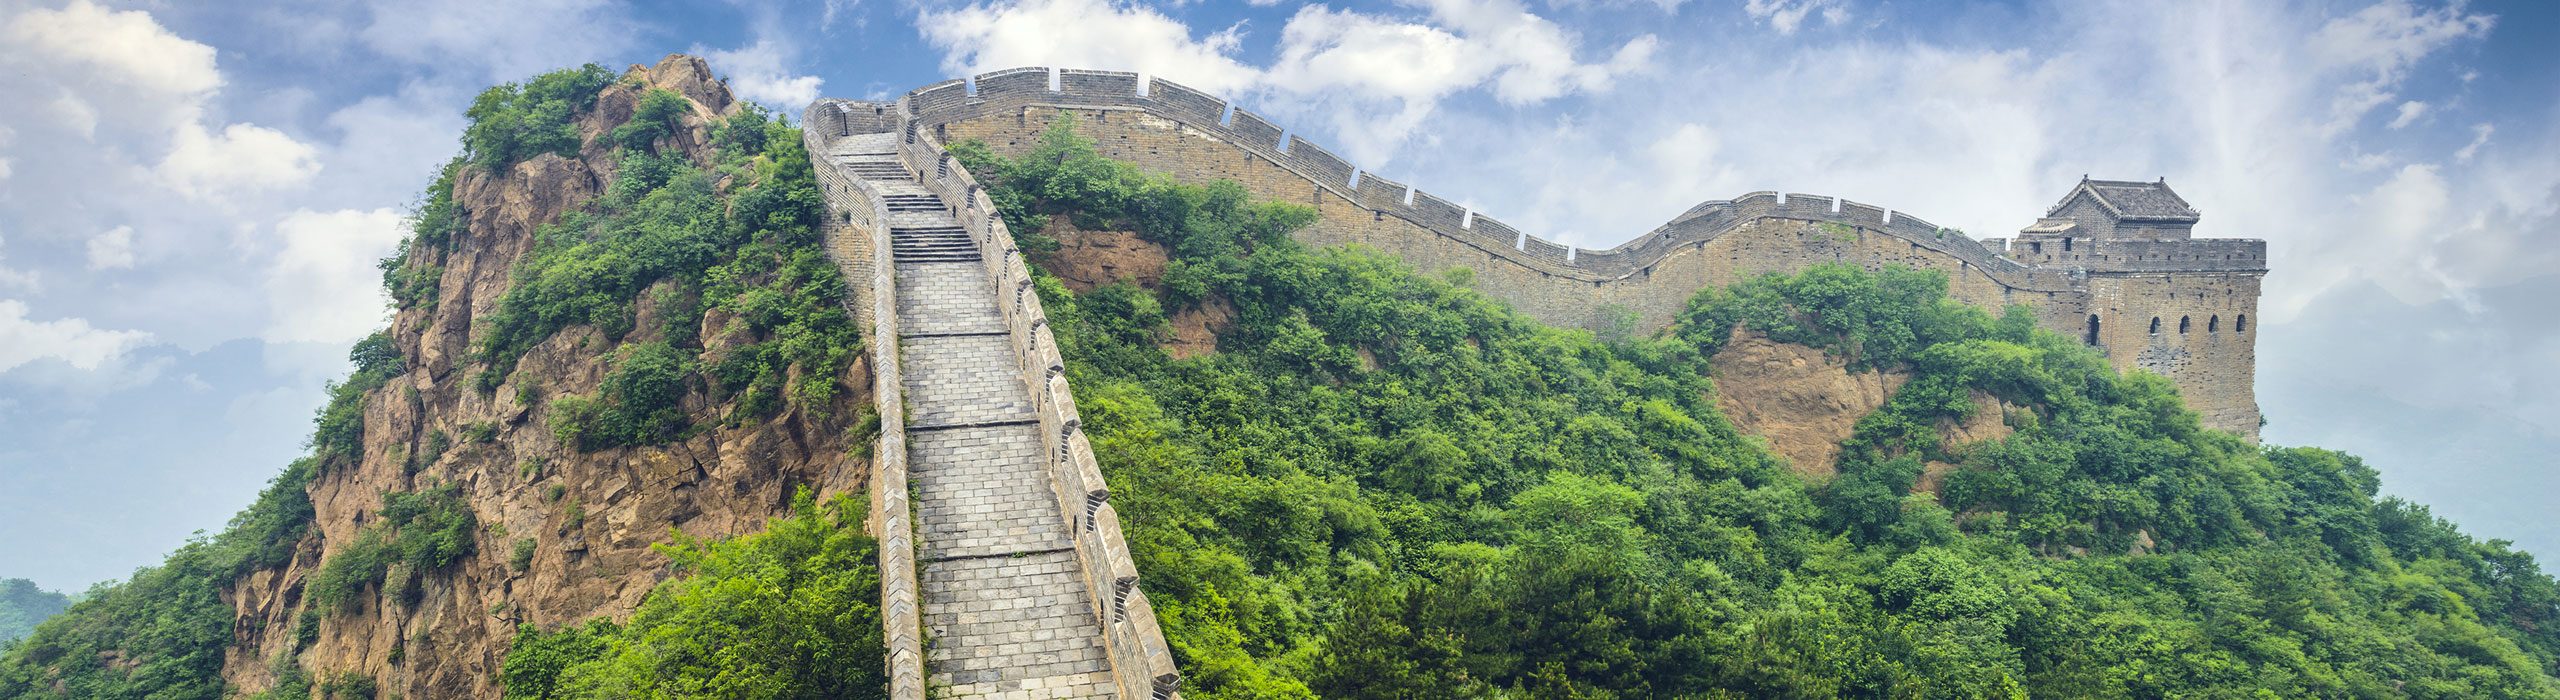 10 Top China Tours from Beijing